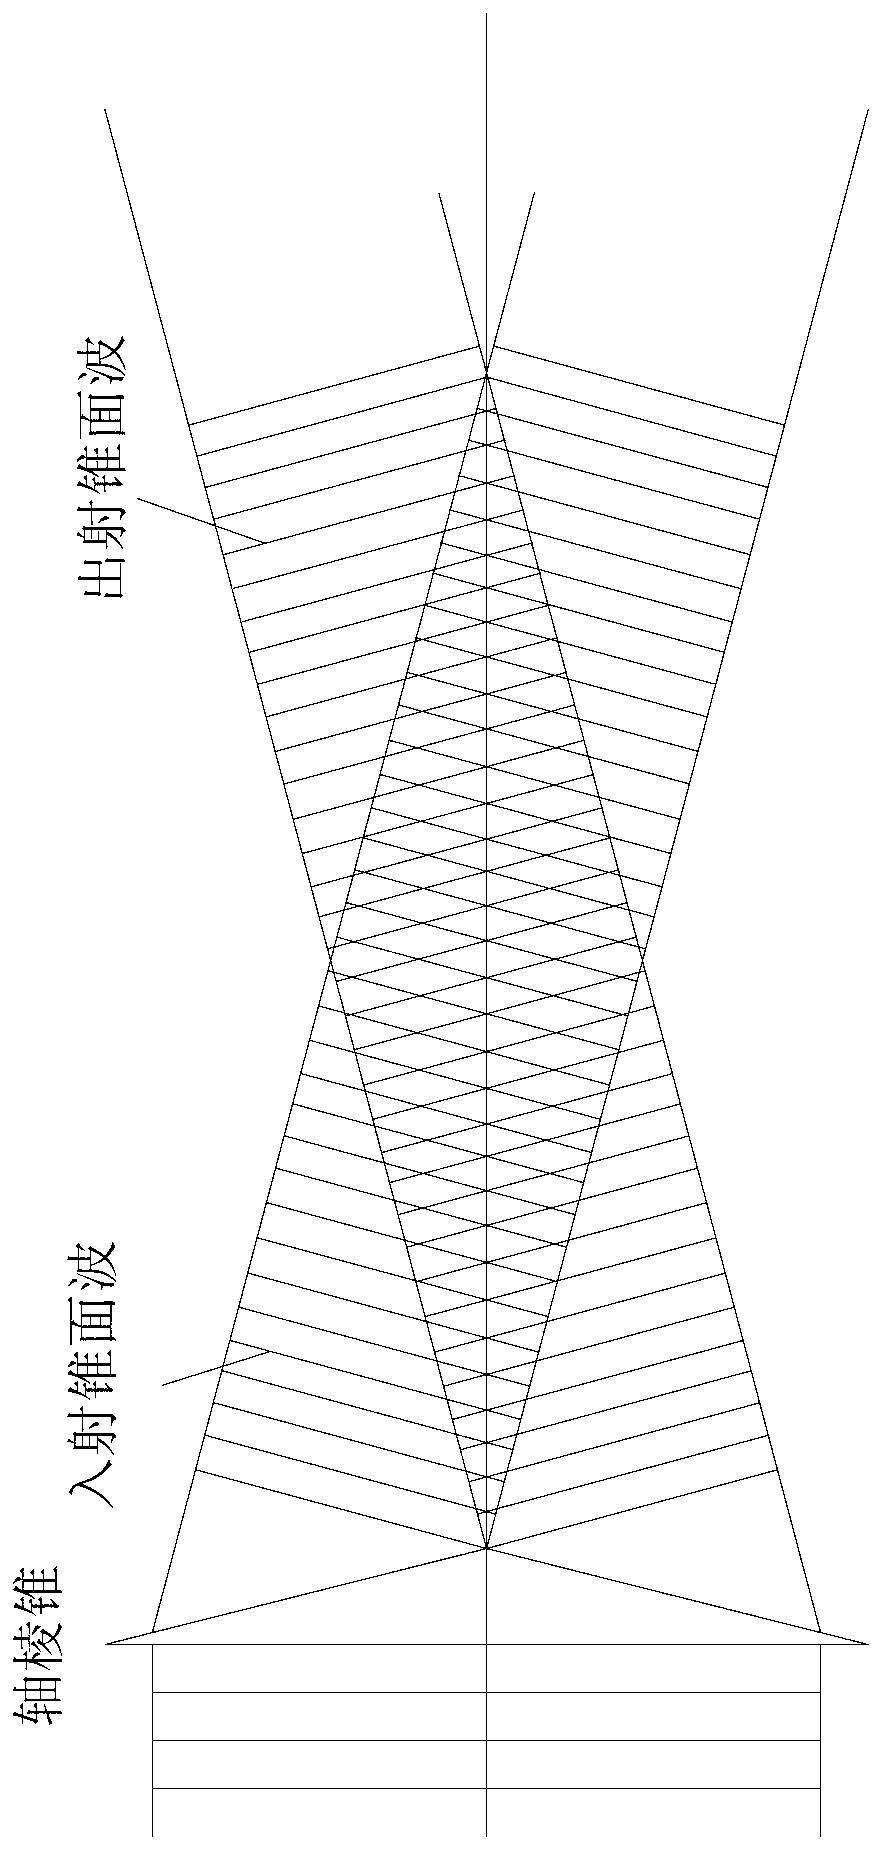 Optical system for generating cyclic Bottle beam